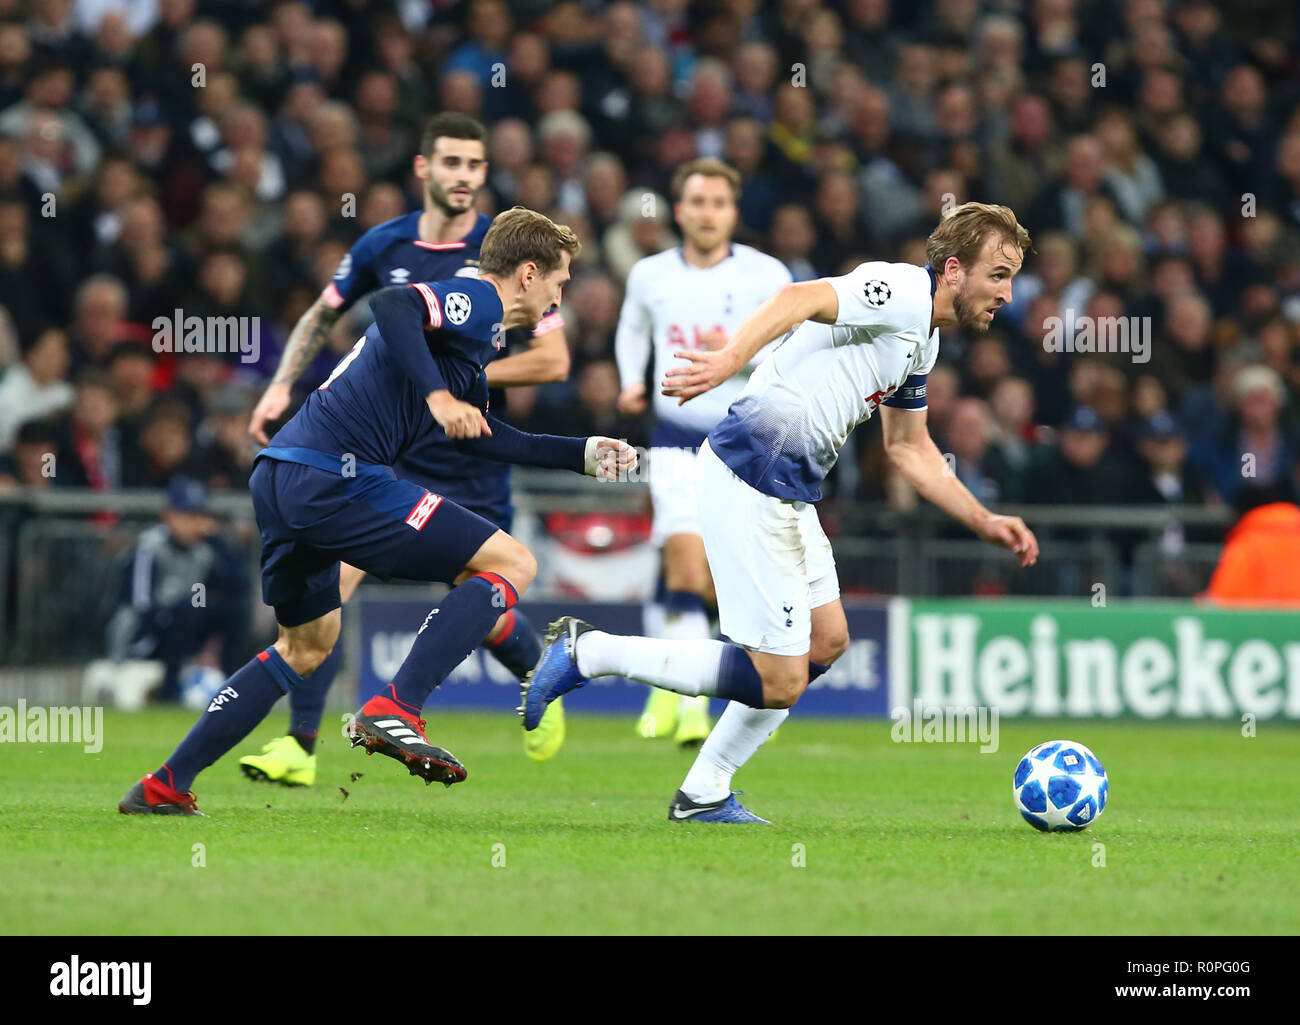 London, England, 06th November 2018.  Tottenham Hotspur's Harry Kane during Champion League Group B between Tottenham Hotspur and PSV Eindhoven at Wembley stadium , London, England on 06 Nov 2018. Credit Action Foto Sport  FA Premier League and Football League images are subject to DataCo Licence. Editorial use ONLY. No print sales. No personal use sales. NO UNPAID USE Credit: Action Foto Sport/Alamy Live News Stock Photo